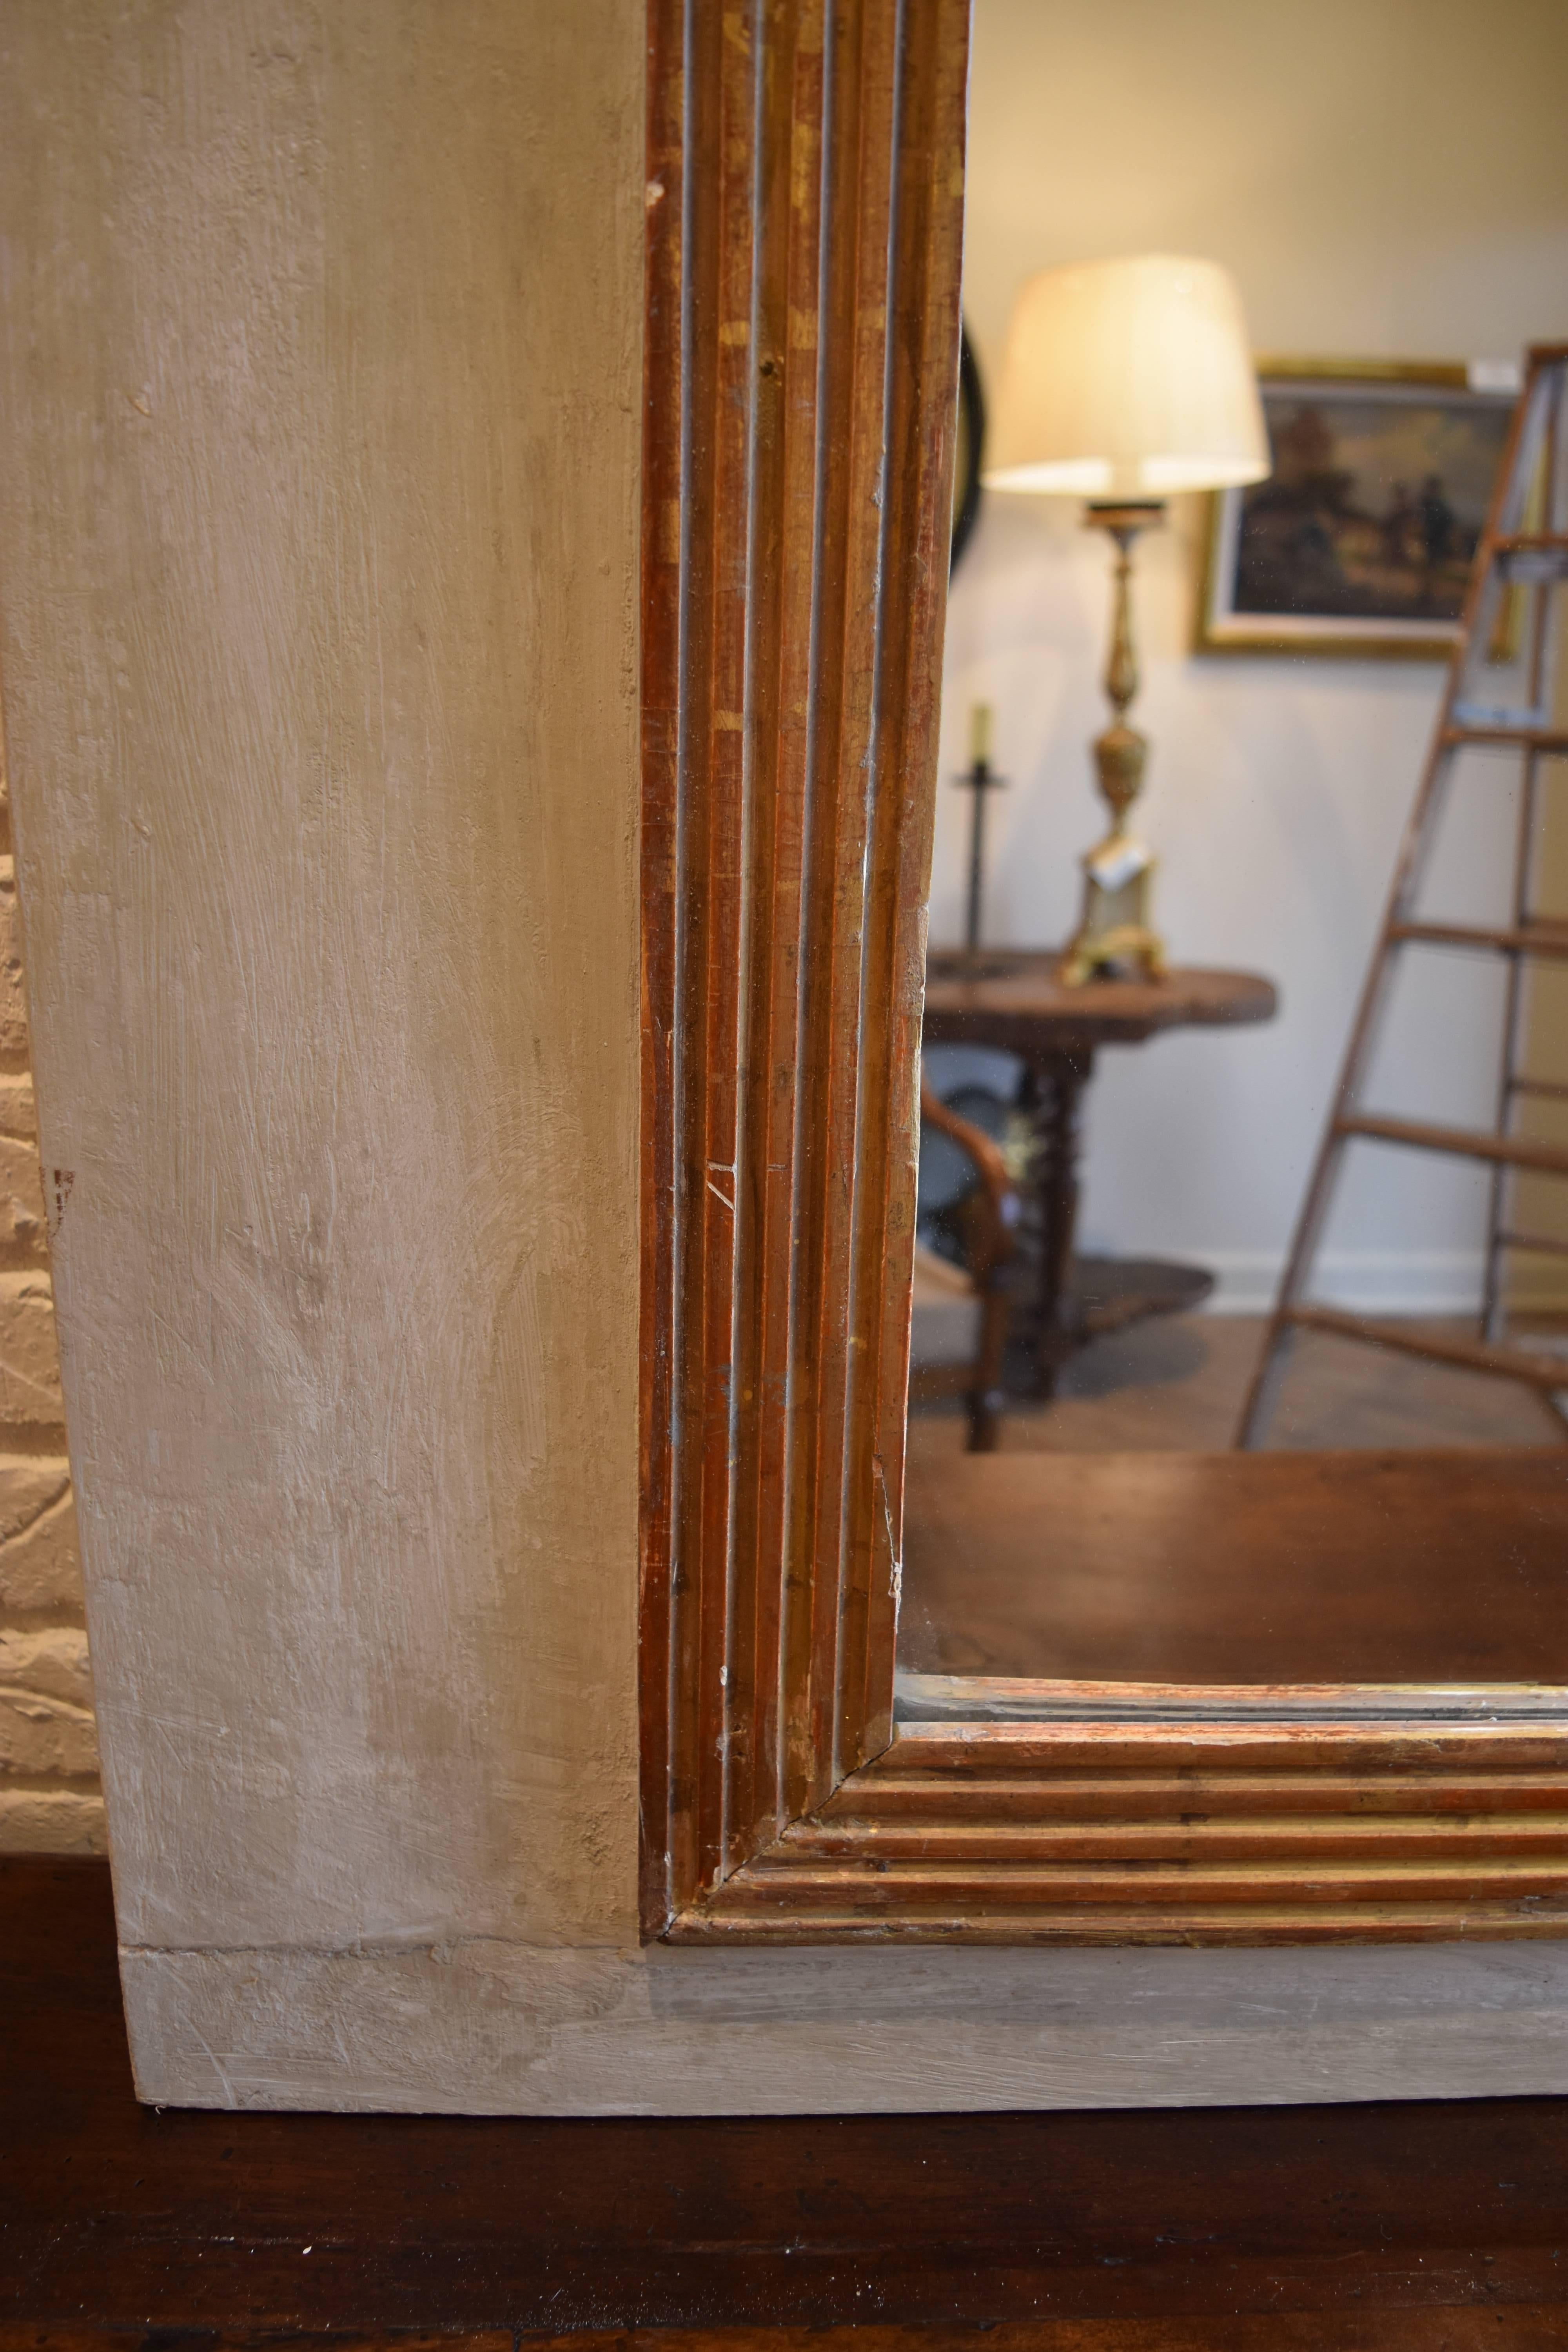 This tall mirror from the South of France has a lovely pale green / grey painted finish with reeded giltwood surrounding the plate glass. The glass appears to be old and the mirror back has the original hand planked wood as seen in the photos.